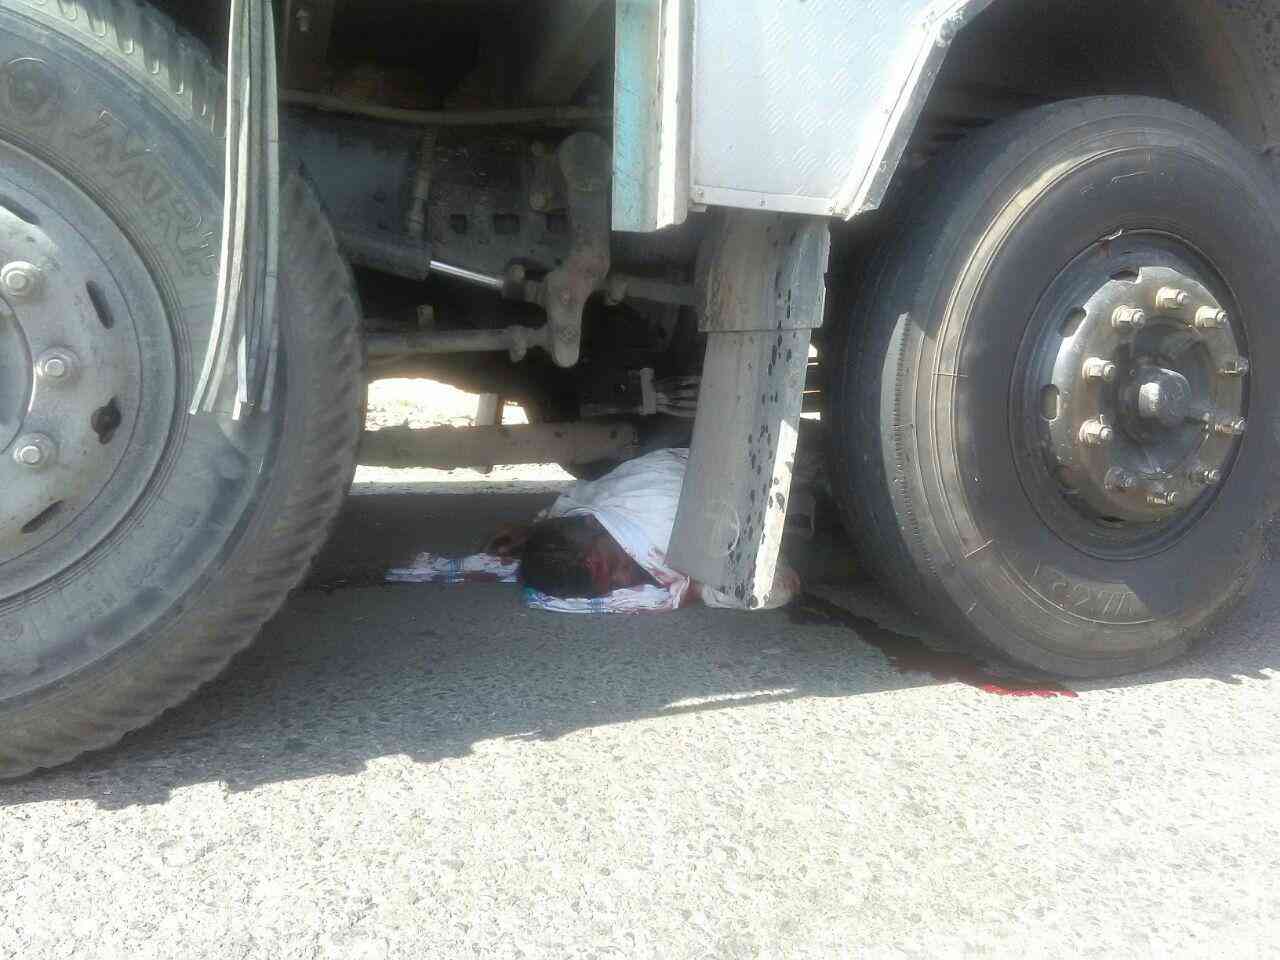 husband and wife died in road accident near betul area news in hind